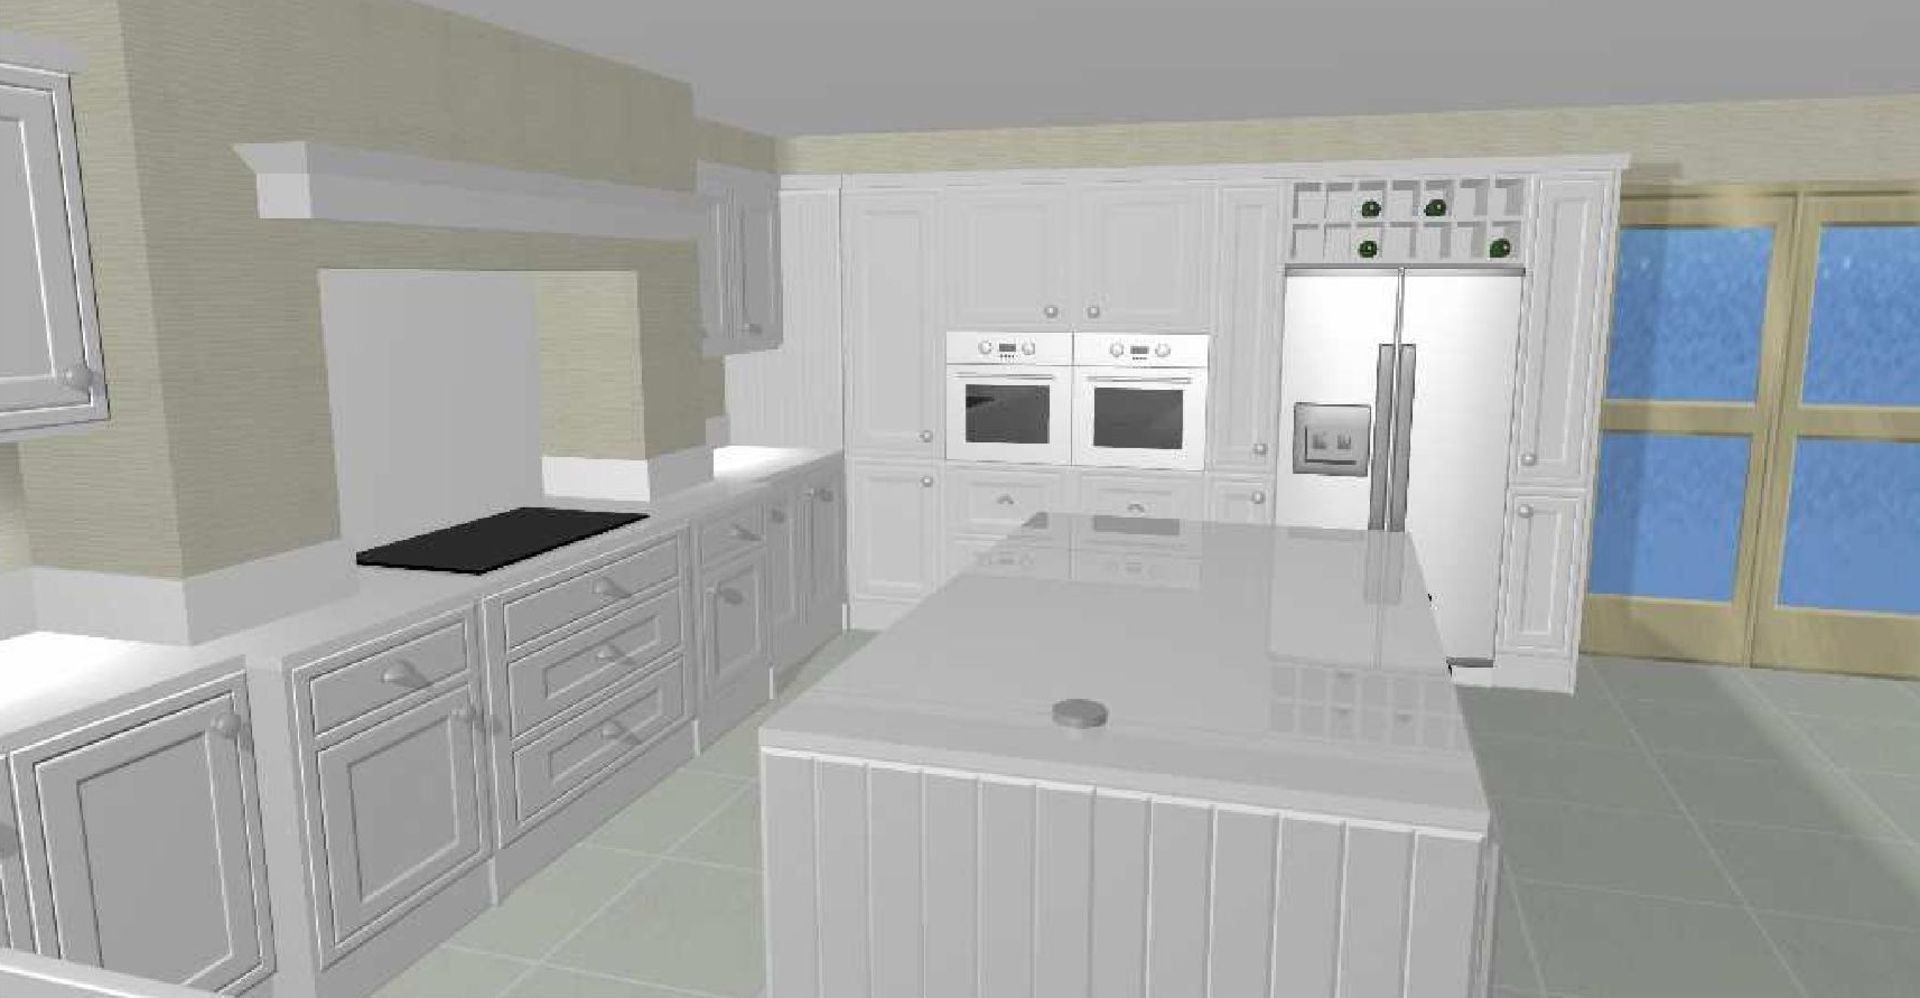 New Fitted Kitchen Designed By 1909 Kitchens - CL338 - Location: Rainhill - Value - £17,000 - Image 3 of 5